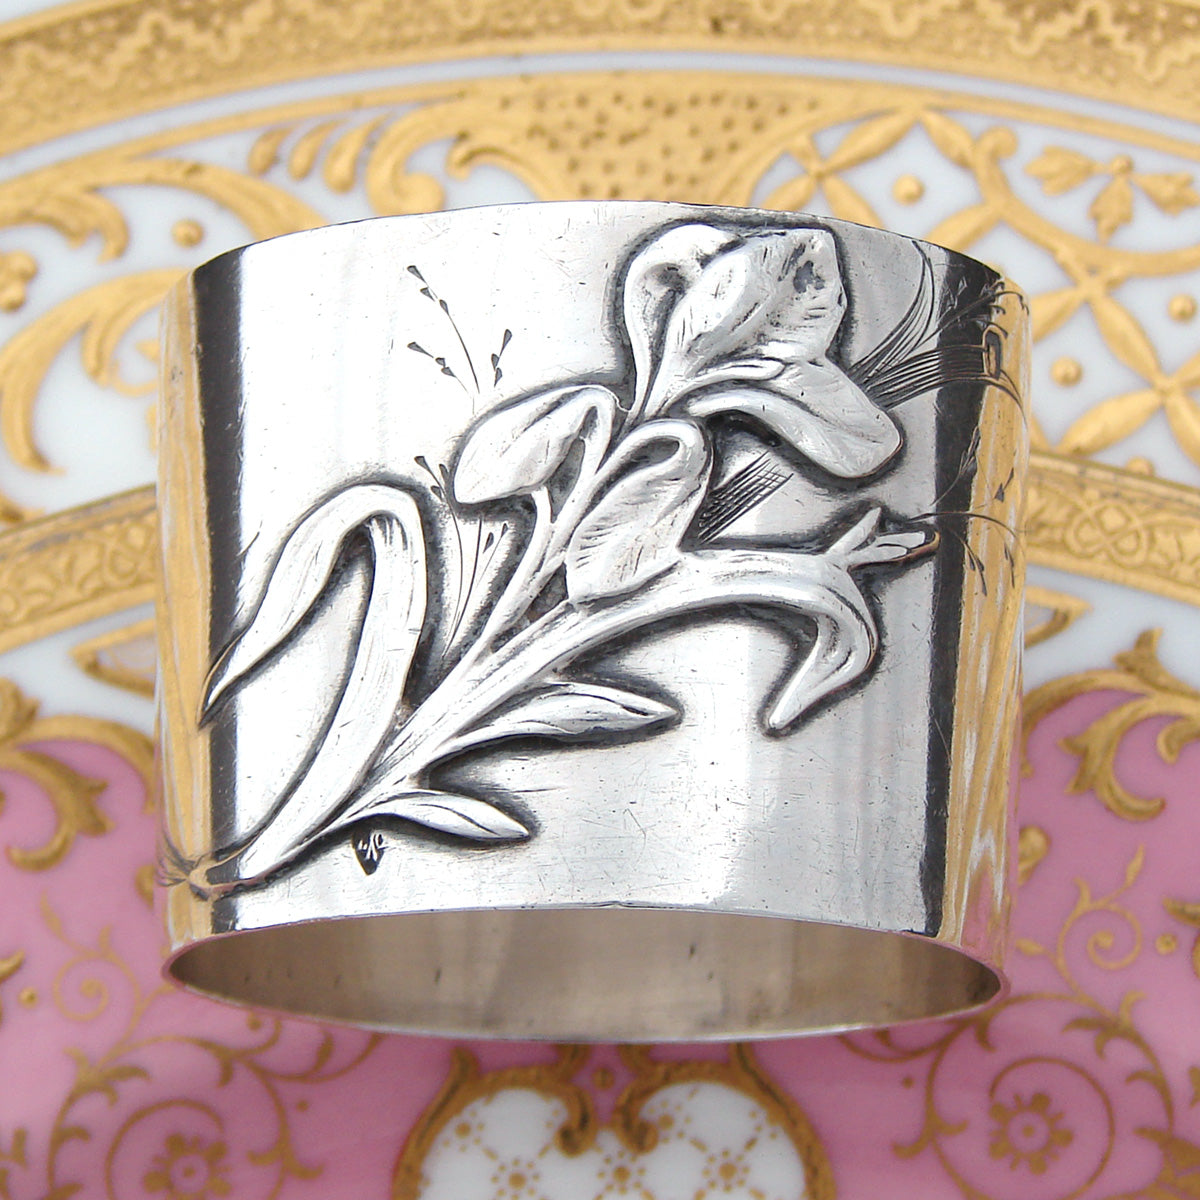 Lovely Antique French Art Nouveau Sterling Silver Napkin Ring, Sinuous Floral Decoration, "Laure"